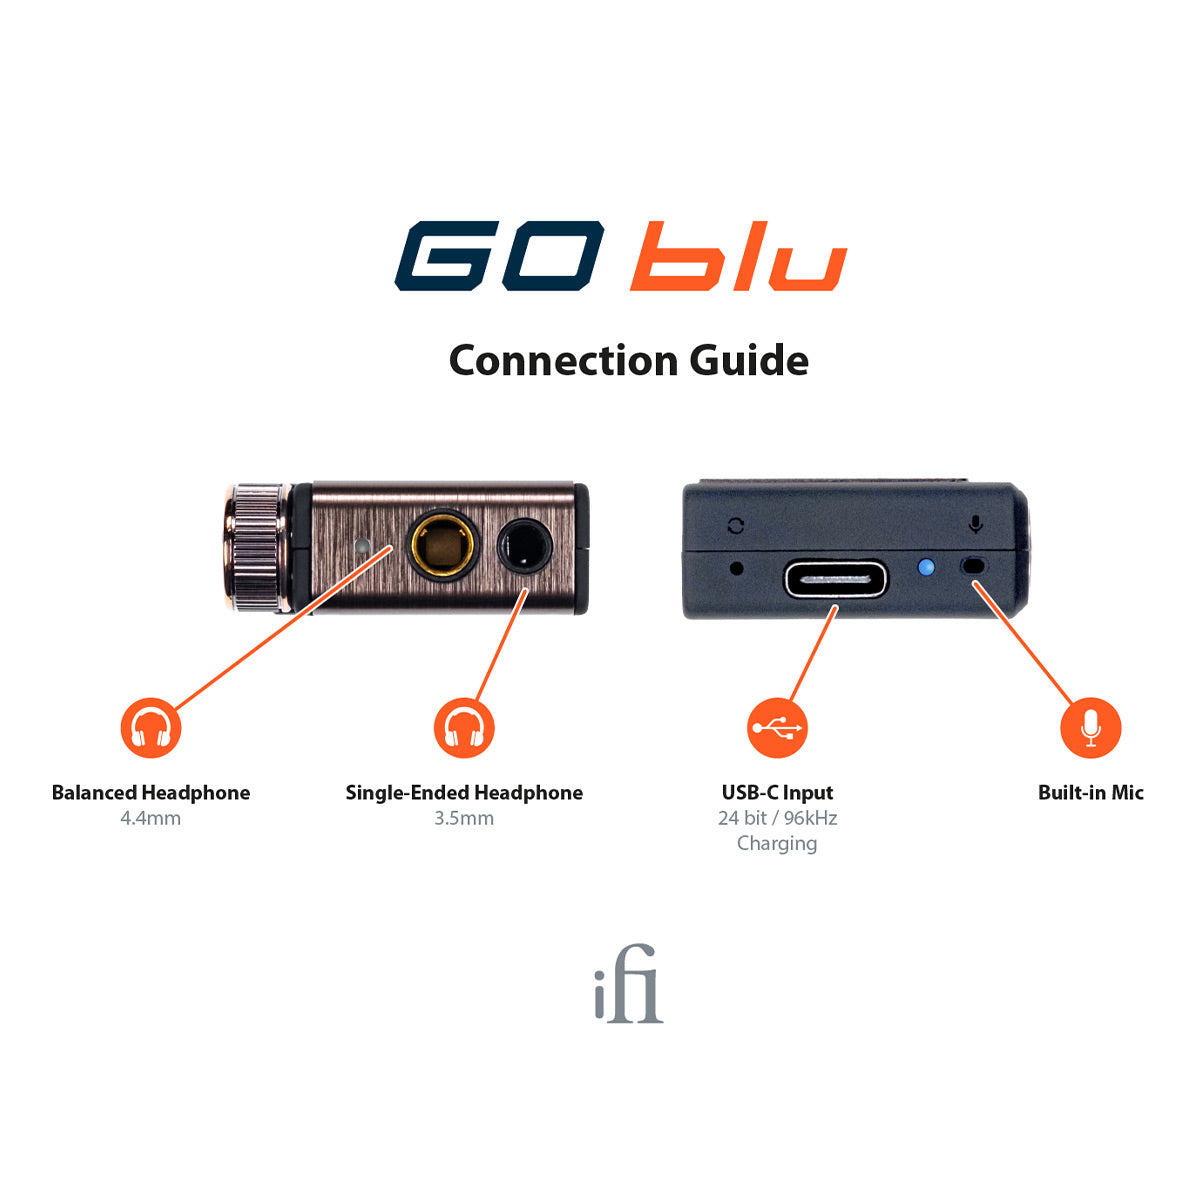 Bluetooth® receiver with USB charger and HDMI interface